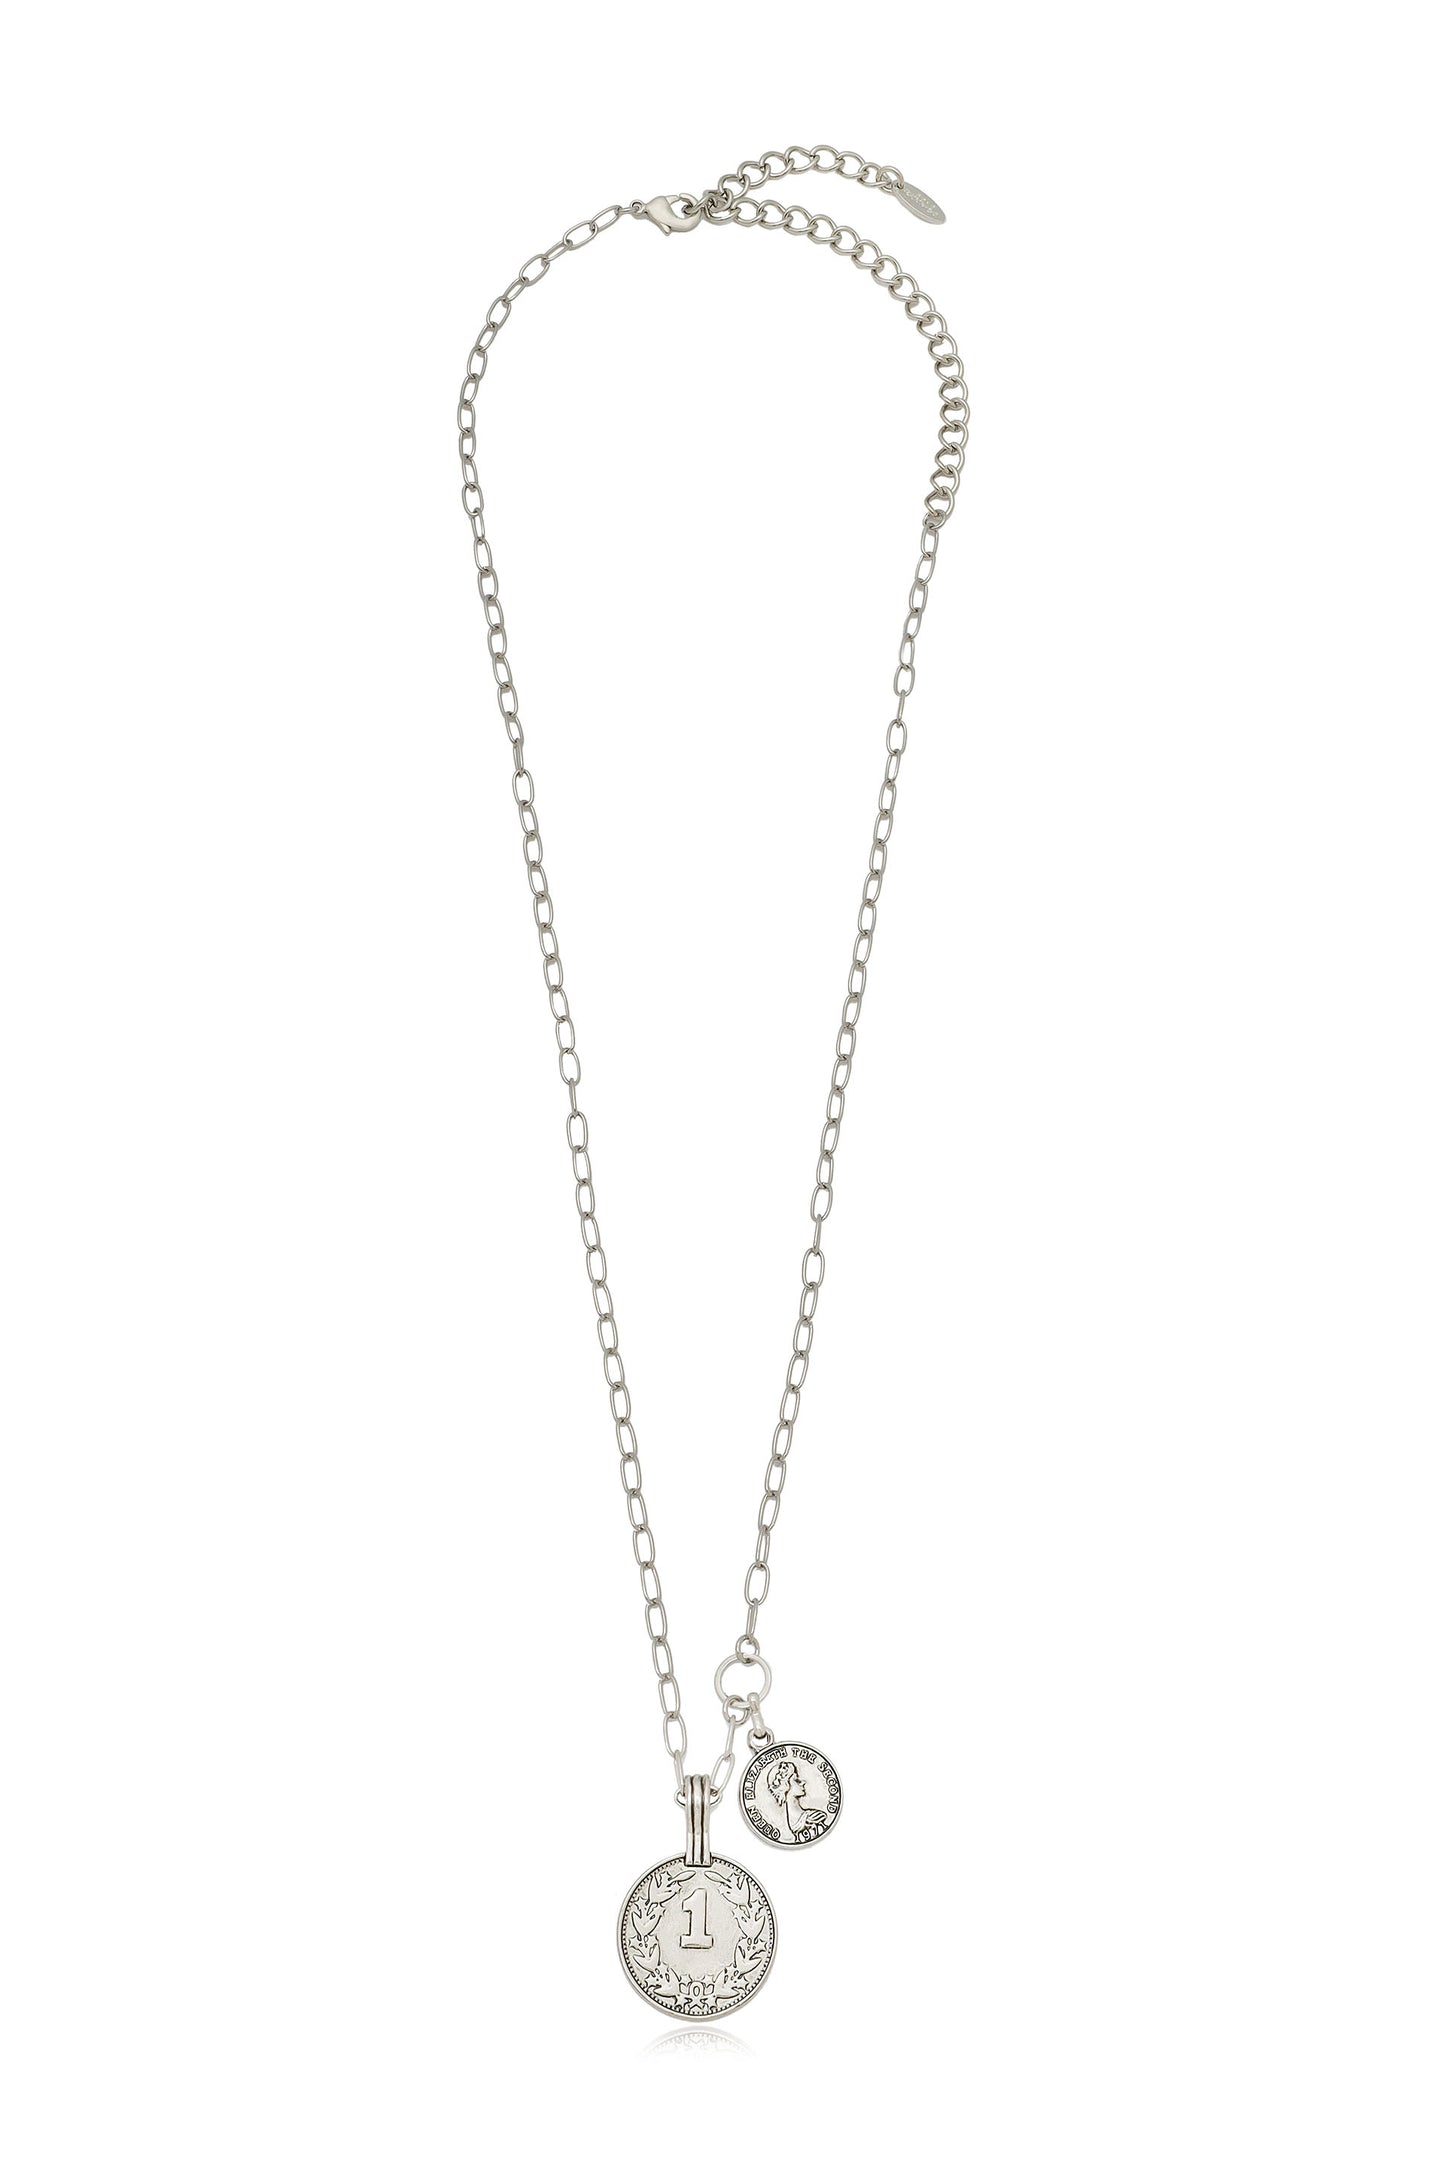 Simplicity Coin & Chain Necklace in rhodium